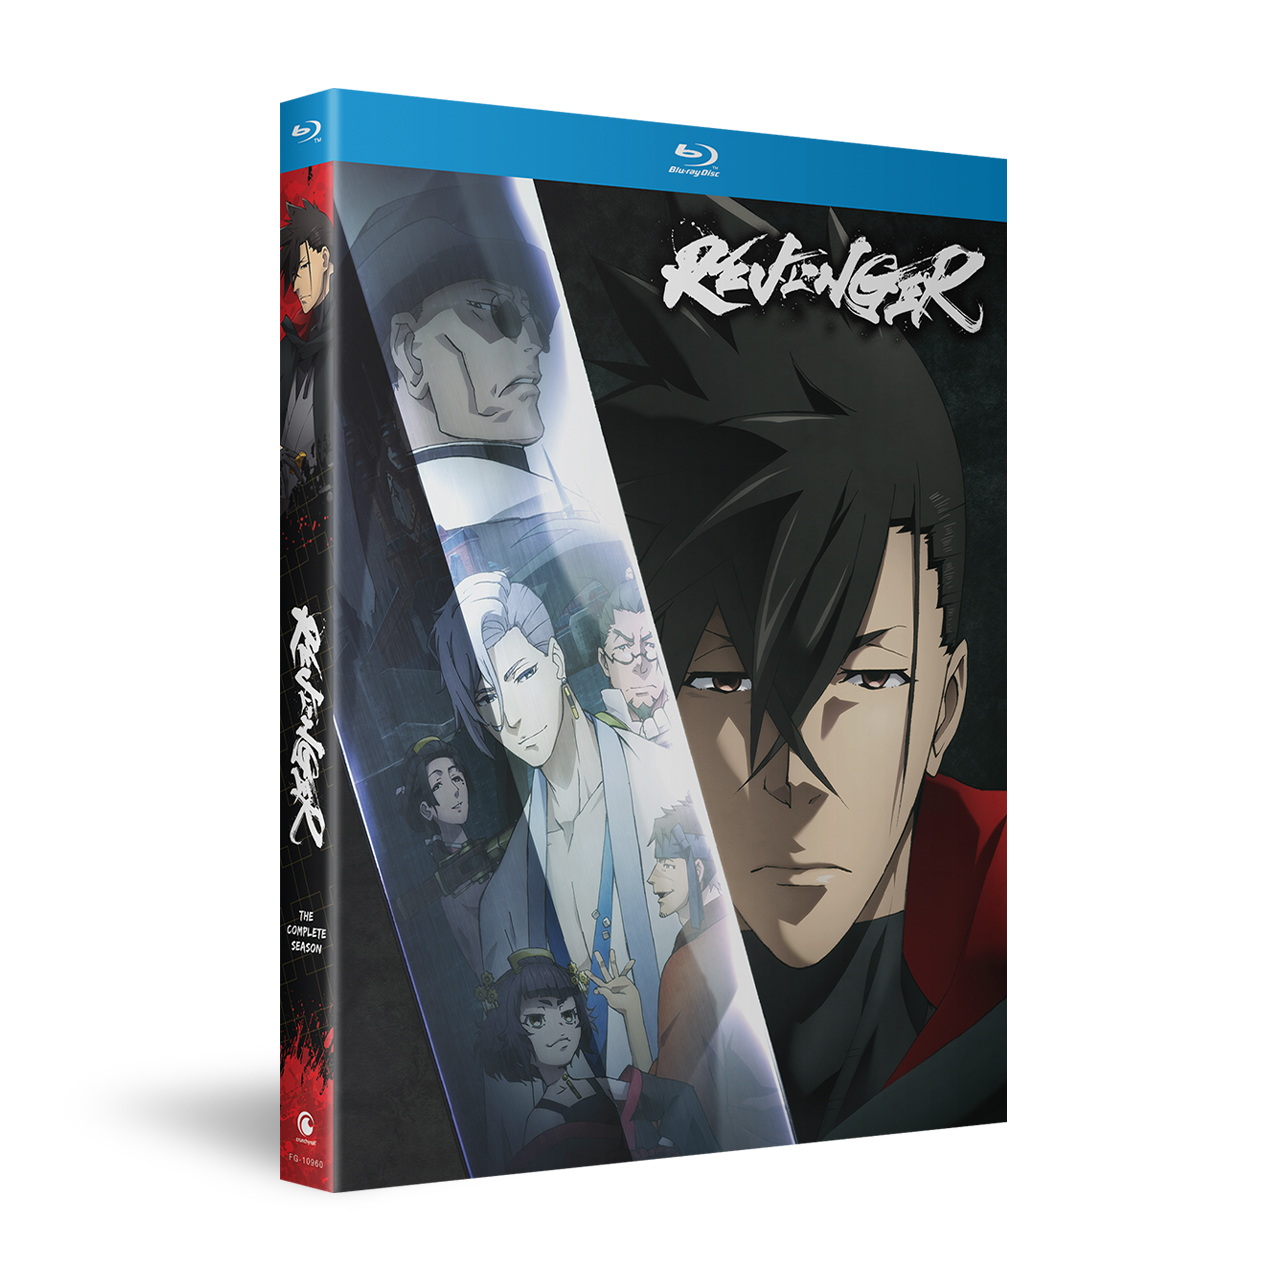 Revenger - The Complete Season - Blu-ray image count 2